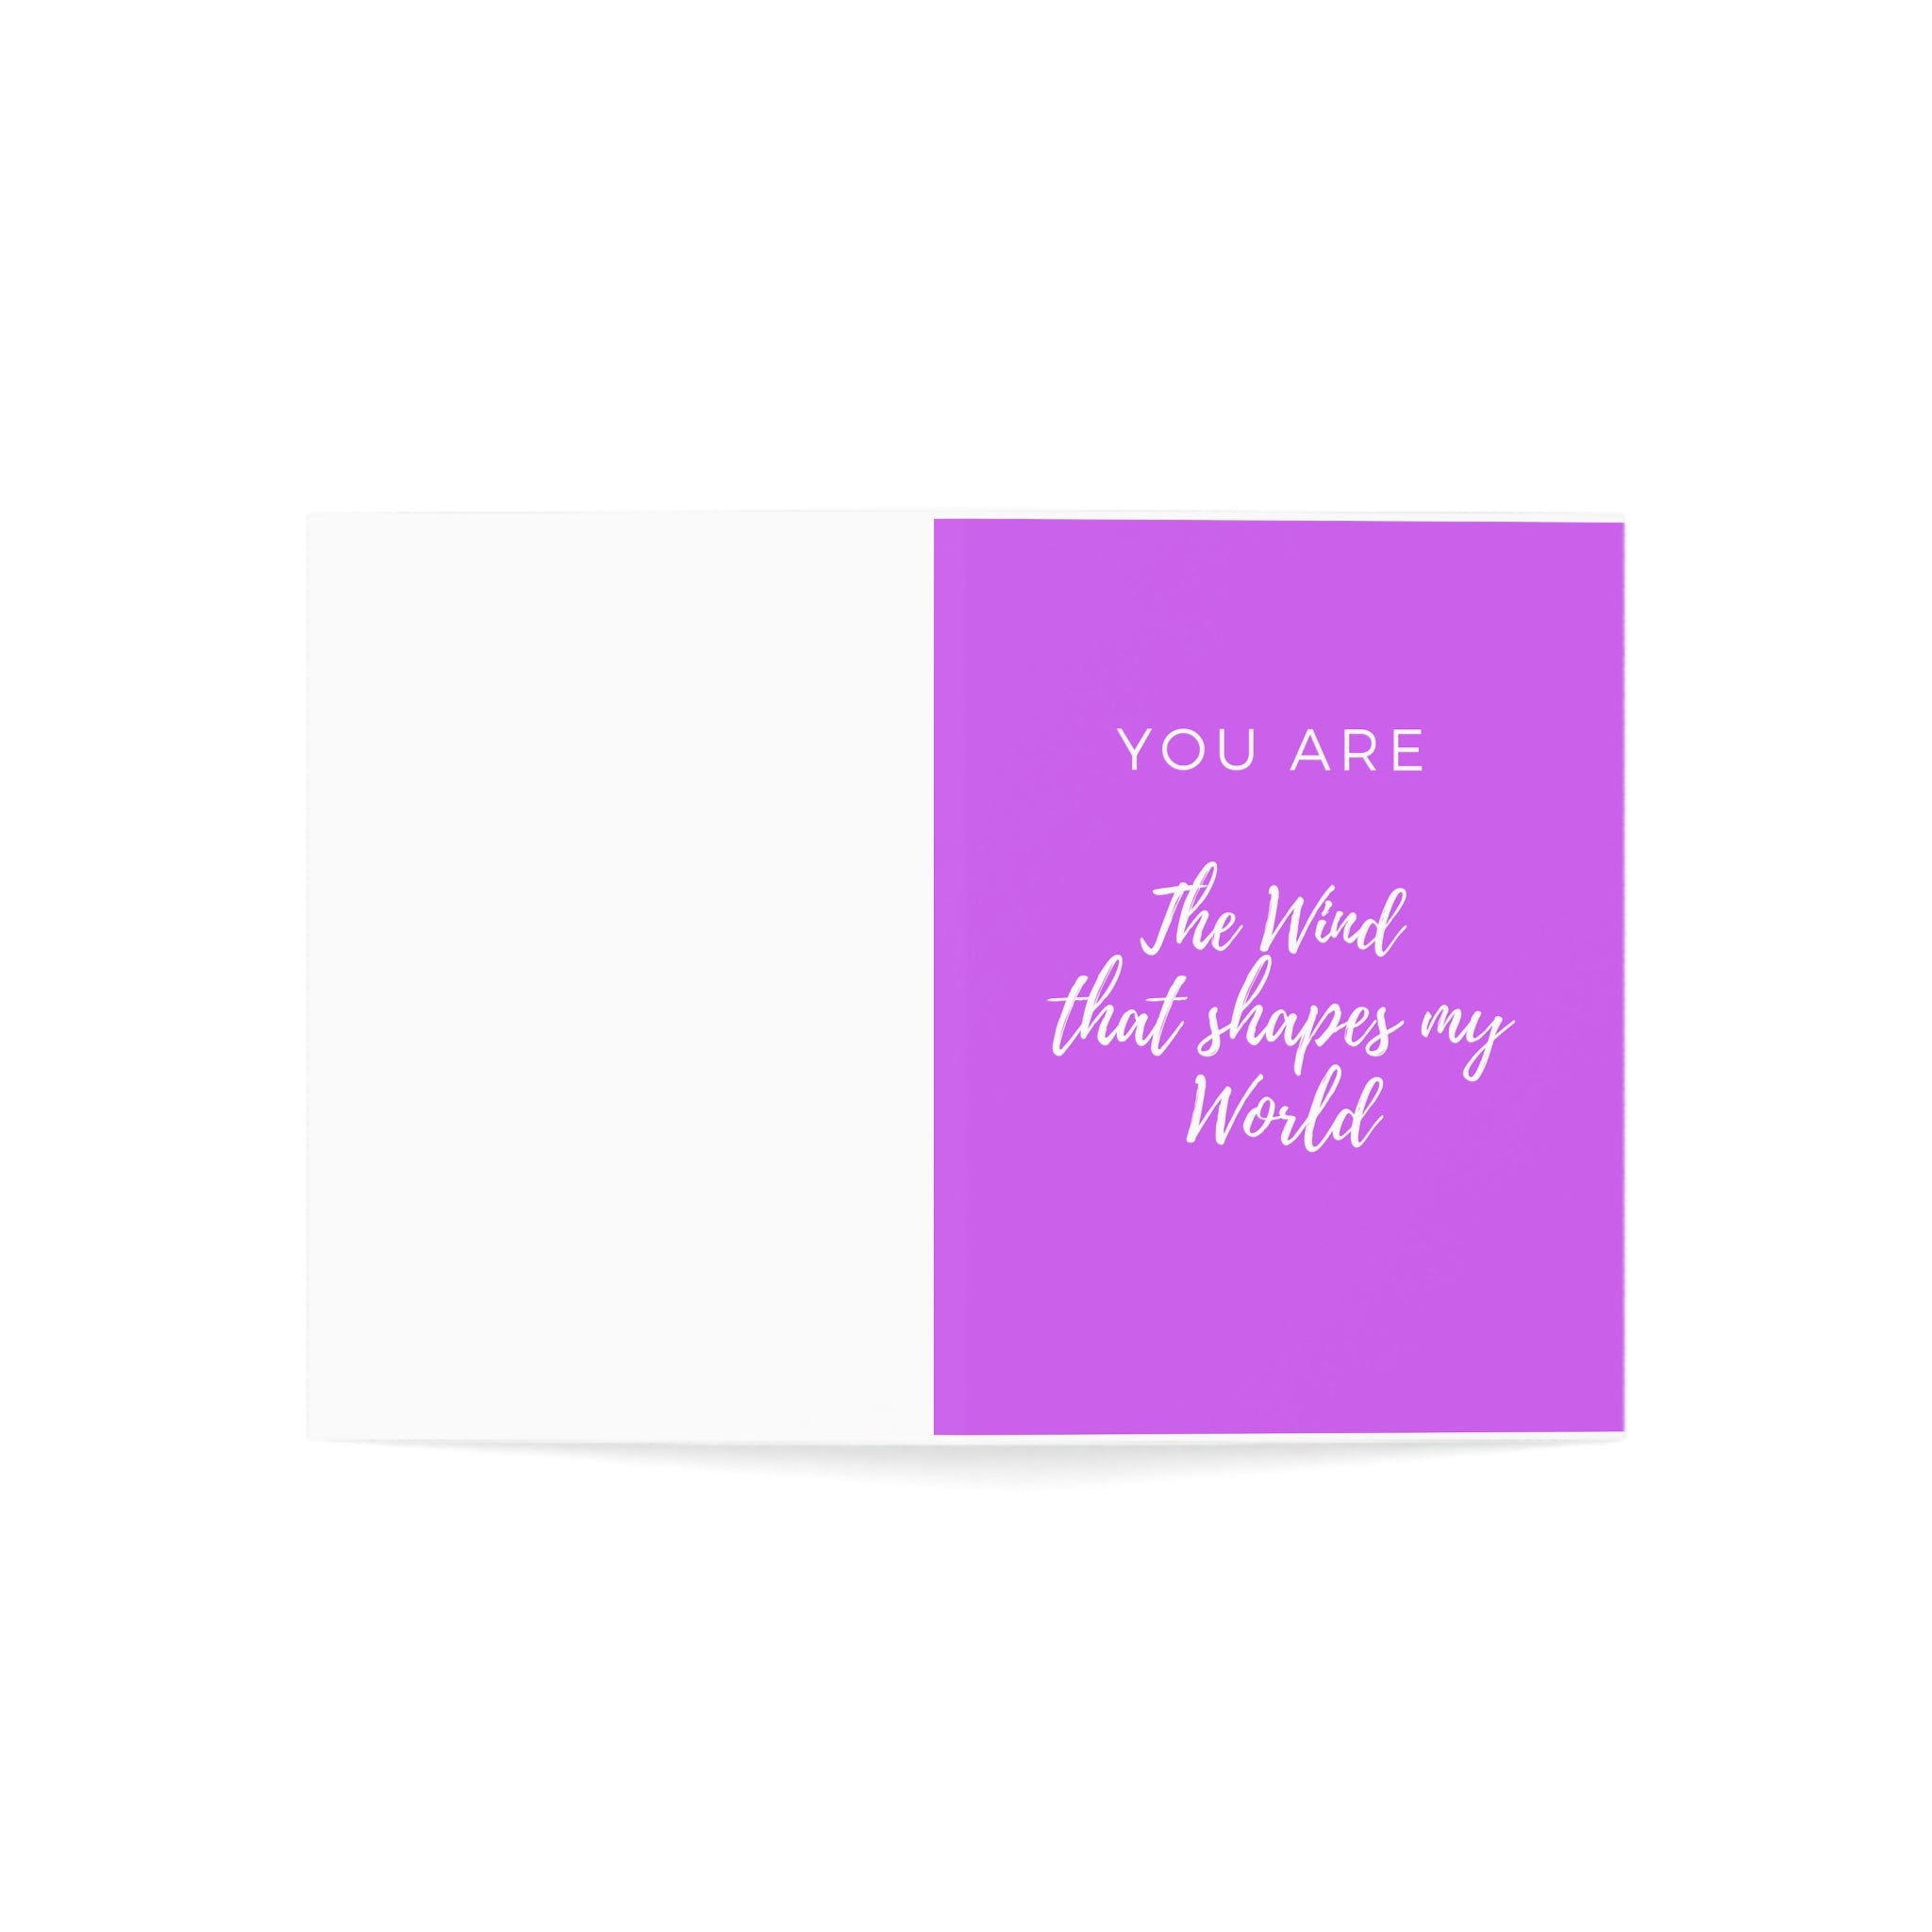 Greeting Cards (Light Violet Cover) You are the wind that shapes my world